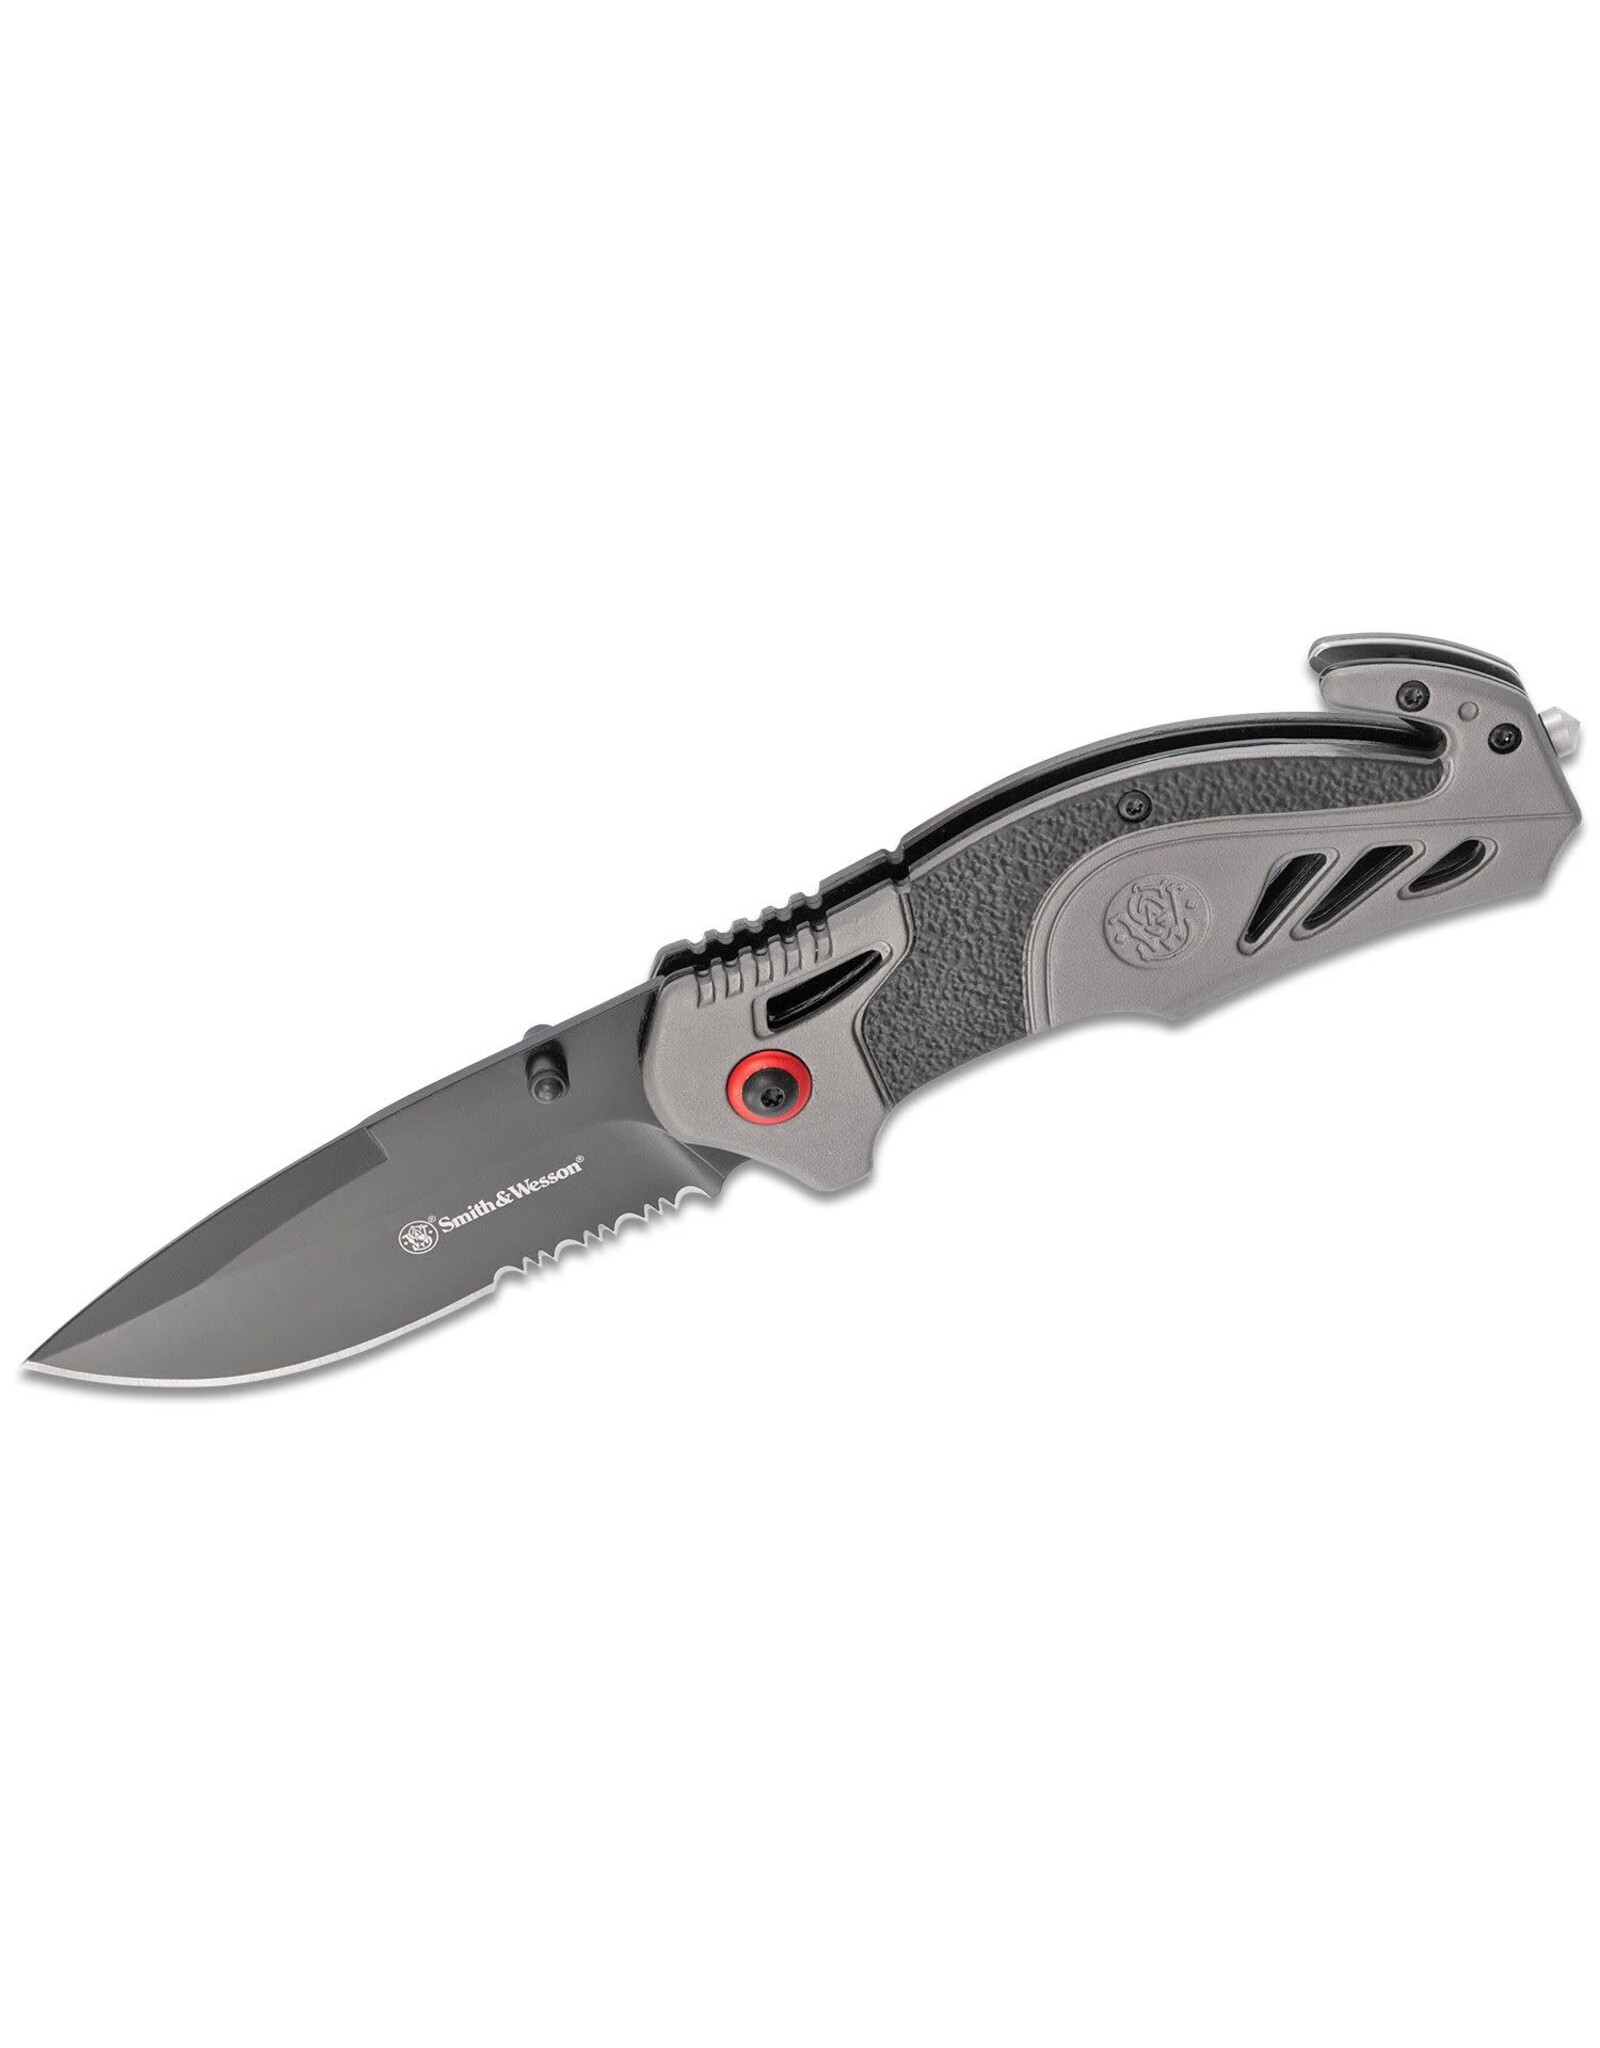 Smith & Wesson Smith & Wesson Rescue Folding Knife 3.27" Black Oxide Combo Blade, Rubberized Aluminum Handles, Liner Lock - 1100038